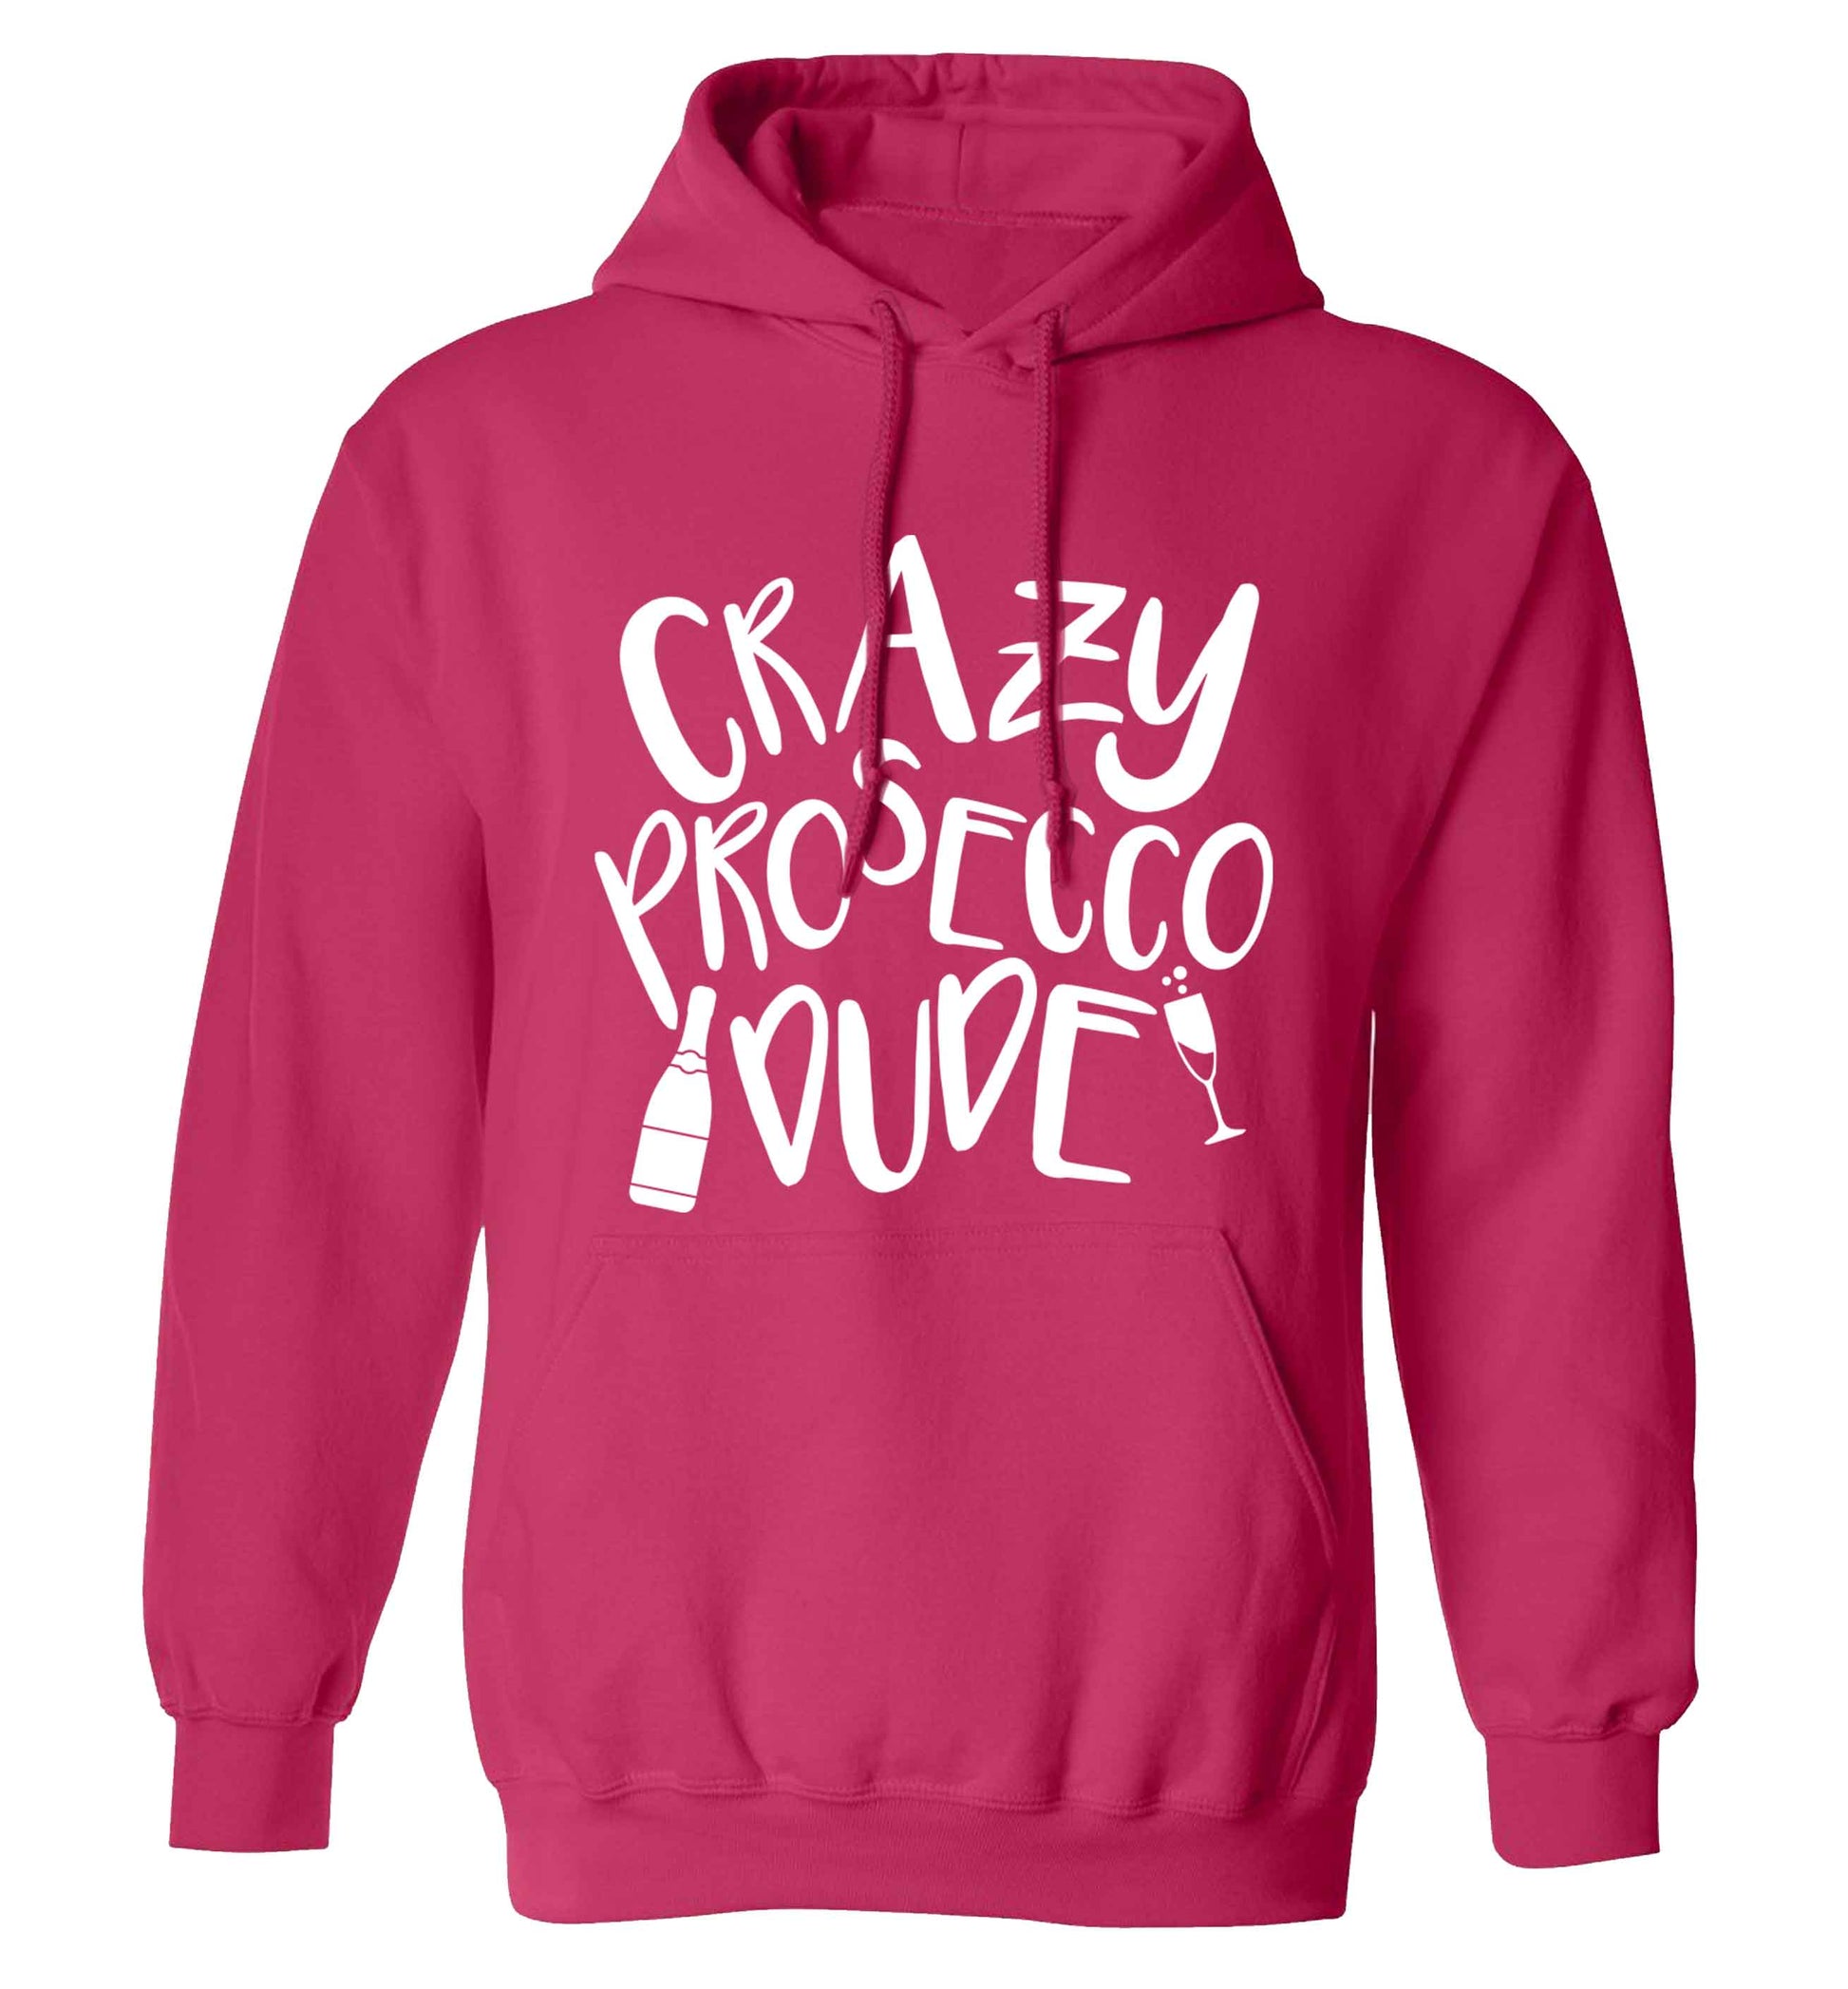 Crazy prosecco dude adults unisex pink hoodie 2XL